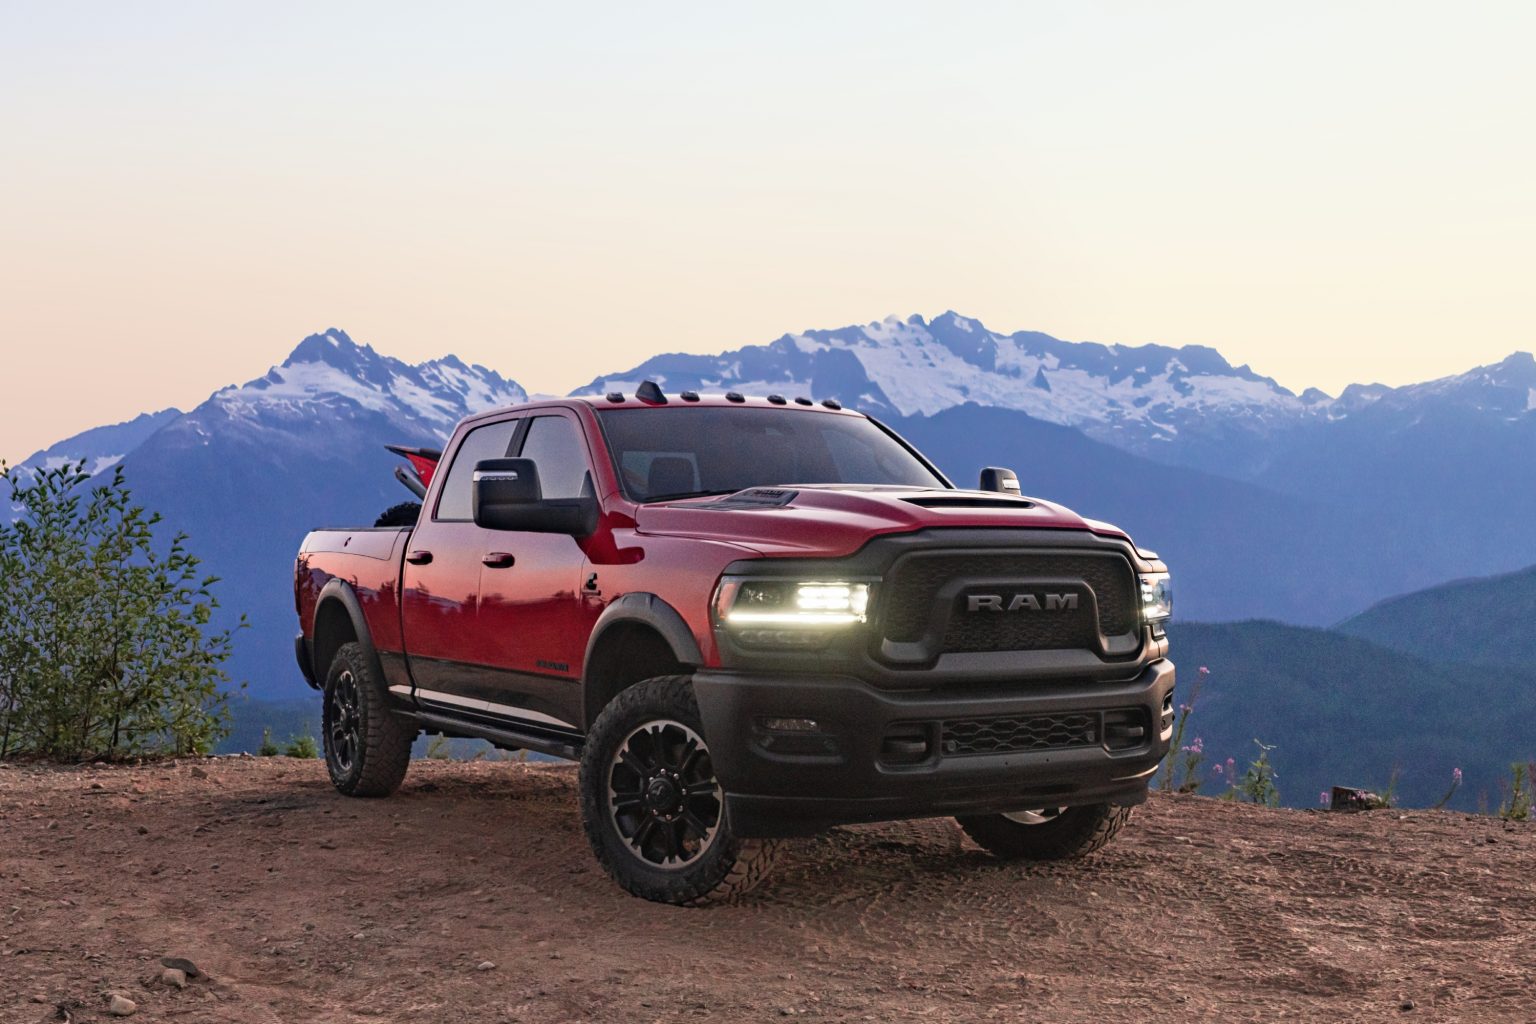 New 2023 Ram 2500 Heavy Duty Rebel Unveiled at State Fair of Texas With